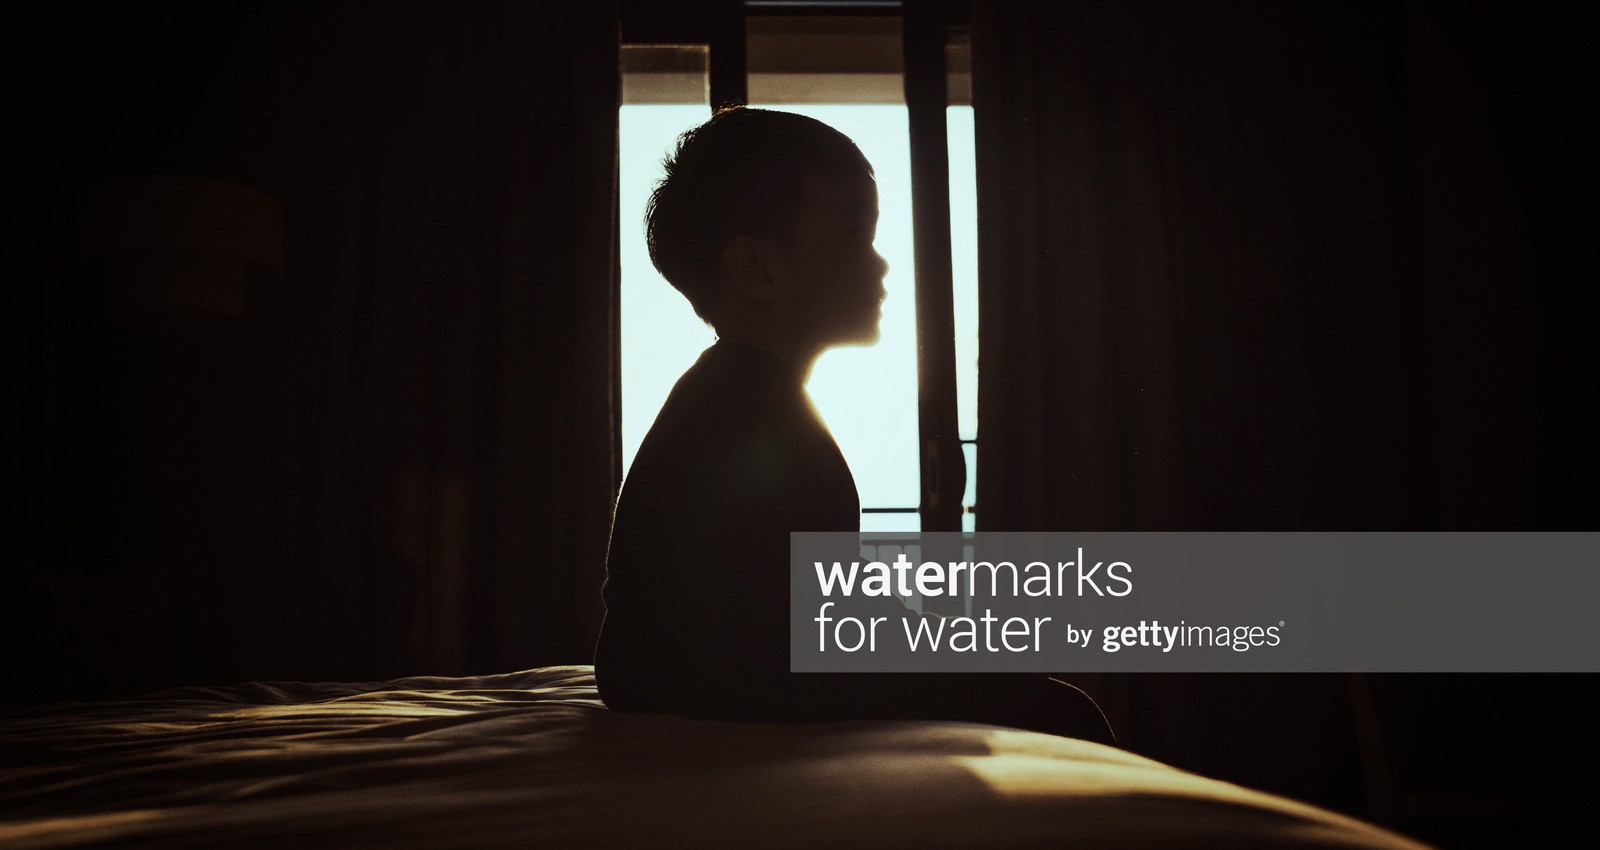 Watermarks for Water